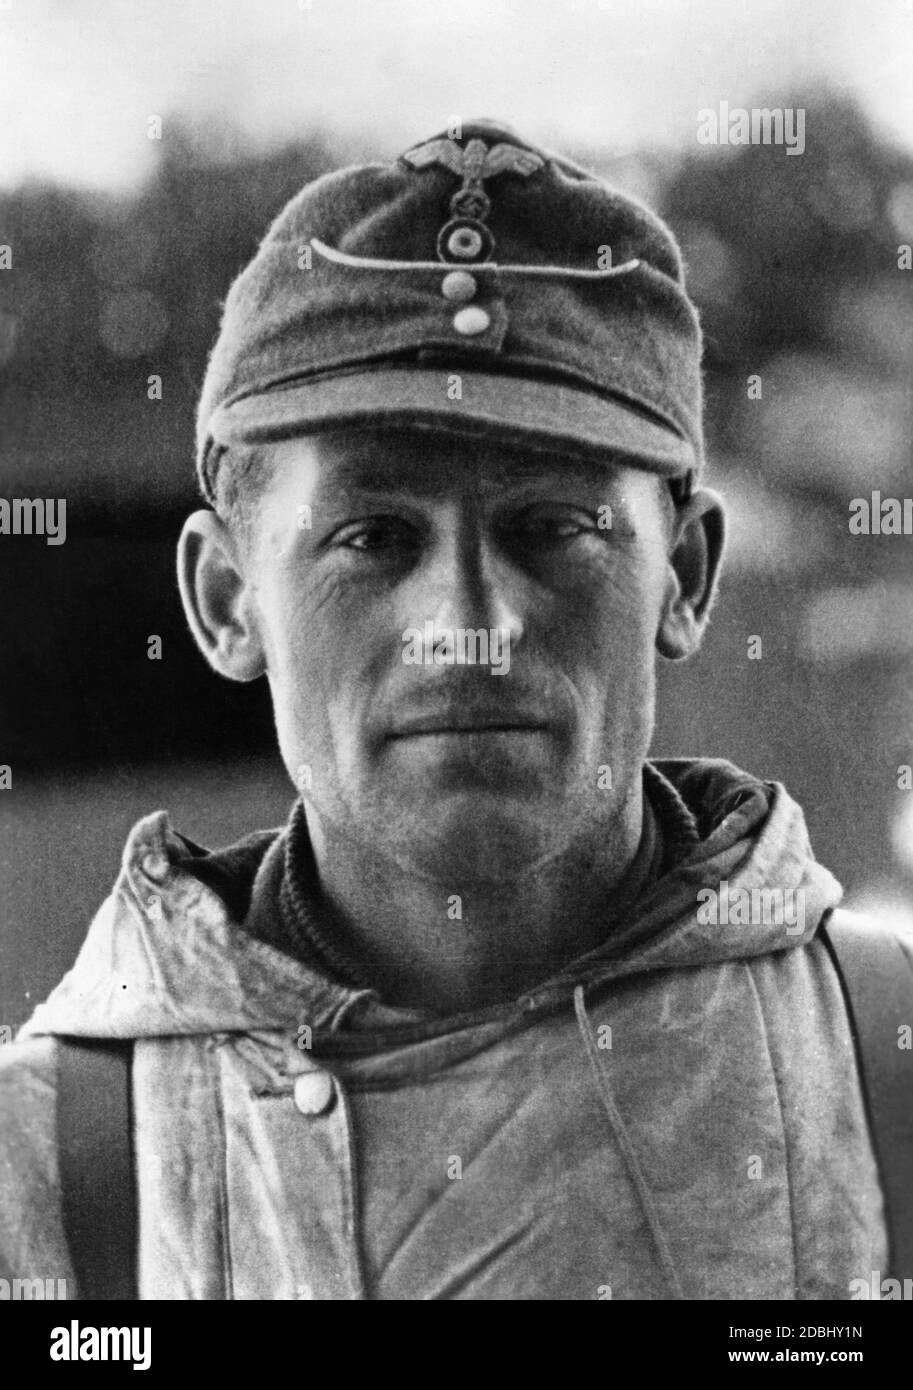 Lieutenant Albert Ernst, 1./schw. Pz.J.Abt. 519, with the Knight's Cross, 1944. The date indicates the bestowal date. Stock Photo